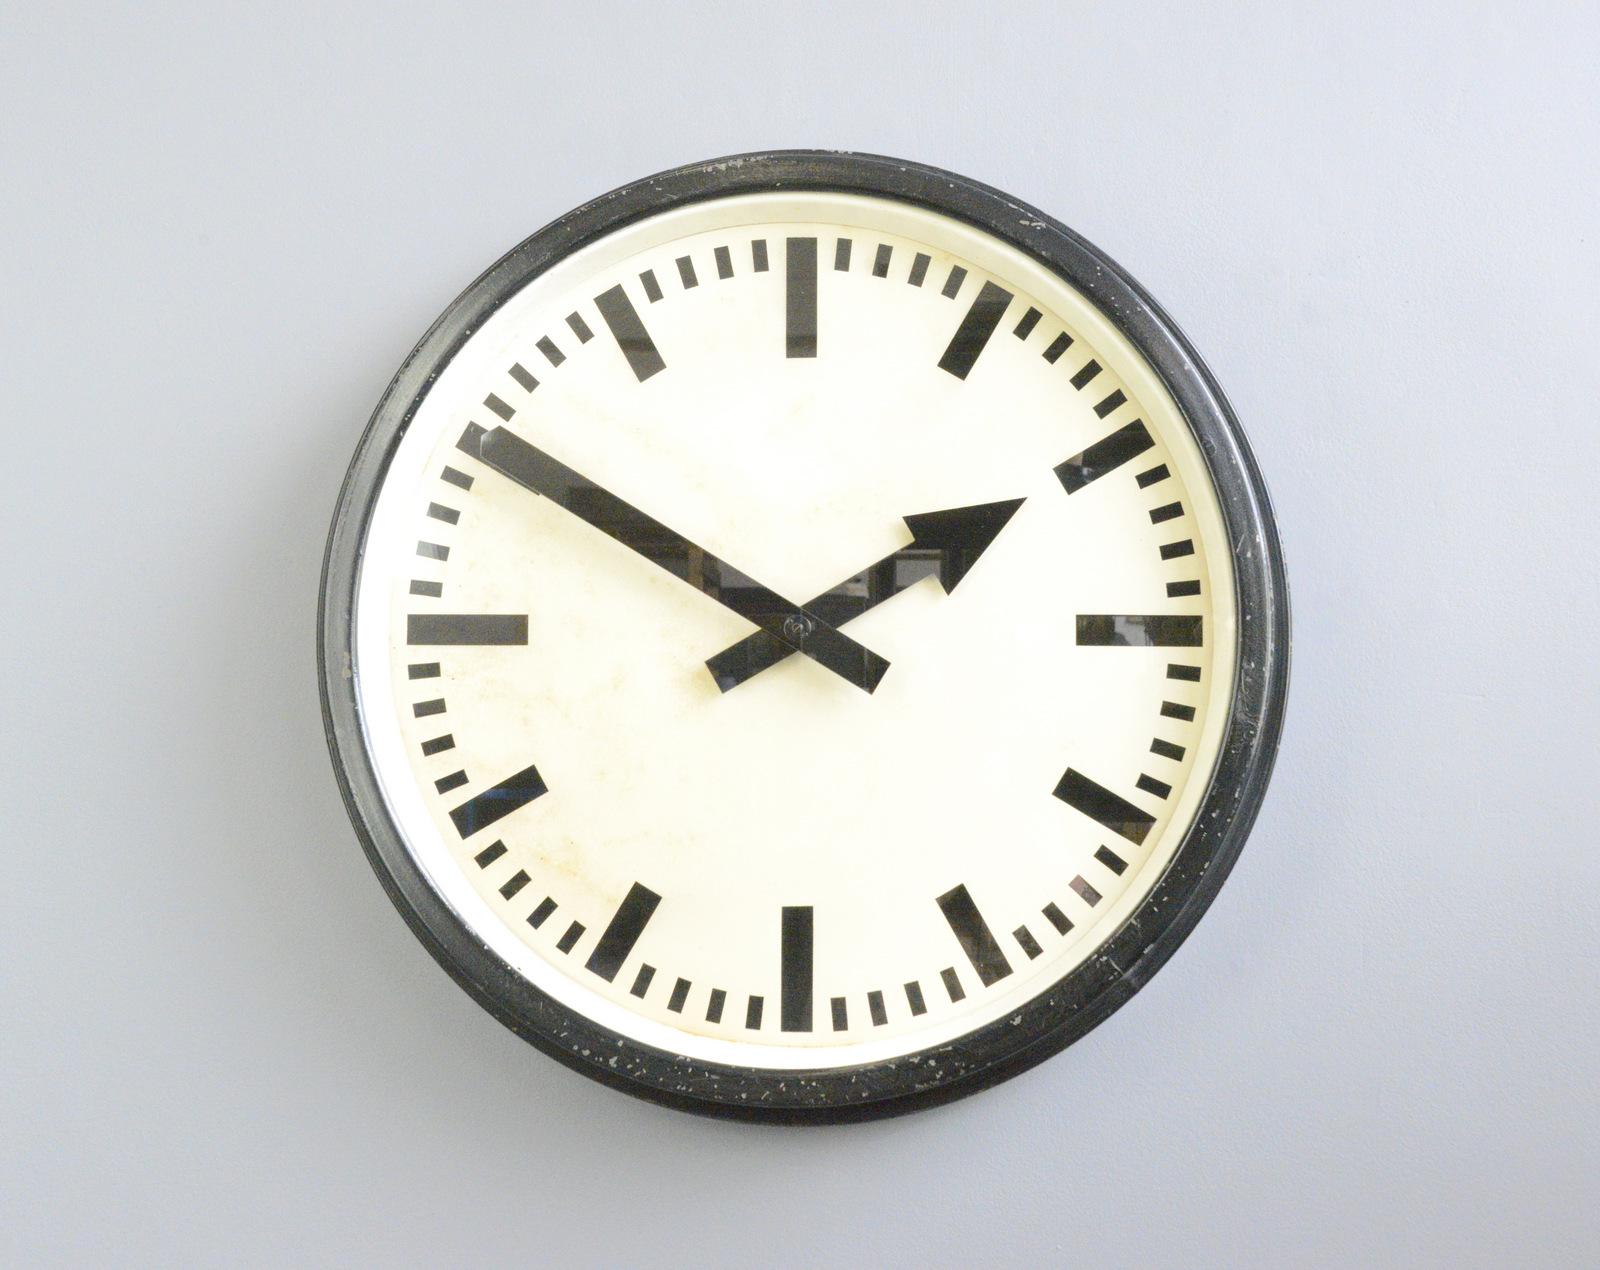 Large German Factory clock, Circa 1950s

- Stepped black steel casing
- Steel dial and glass face
- Original arrow hands
- New AA battery powered quartz motor
- German ~ 1950s
- 76cm wide x 11cm deep

Condition Report

Fully restored and